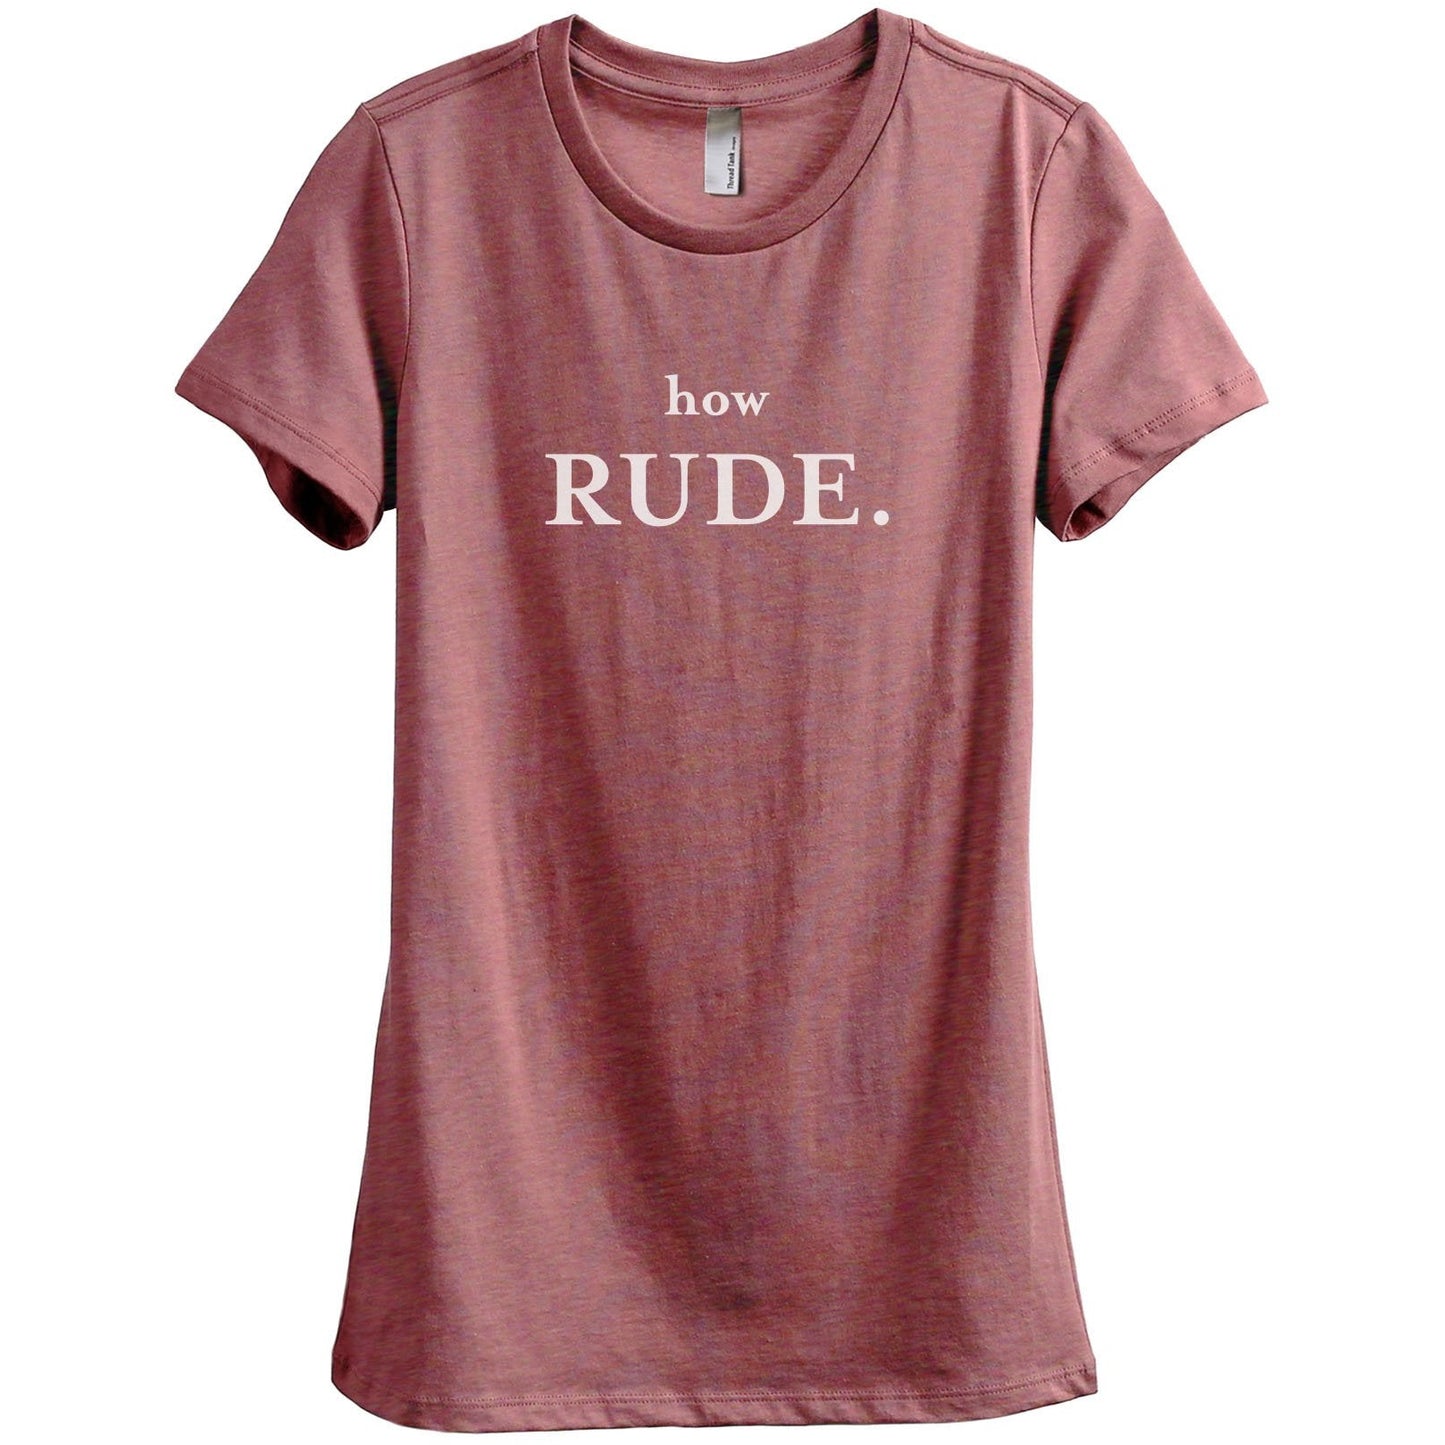 How Rude Women's Relaxed Crewneck T-Shirt Top Tee Heather Rouge
